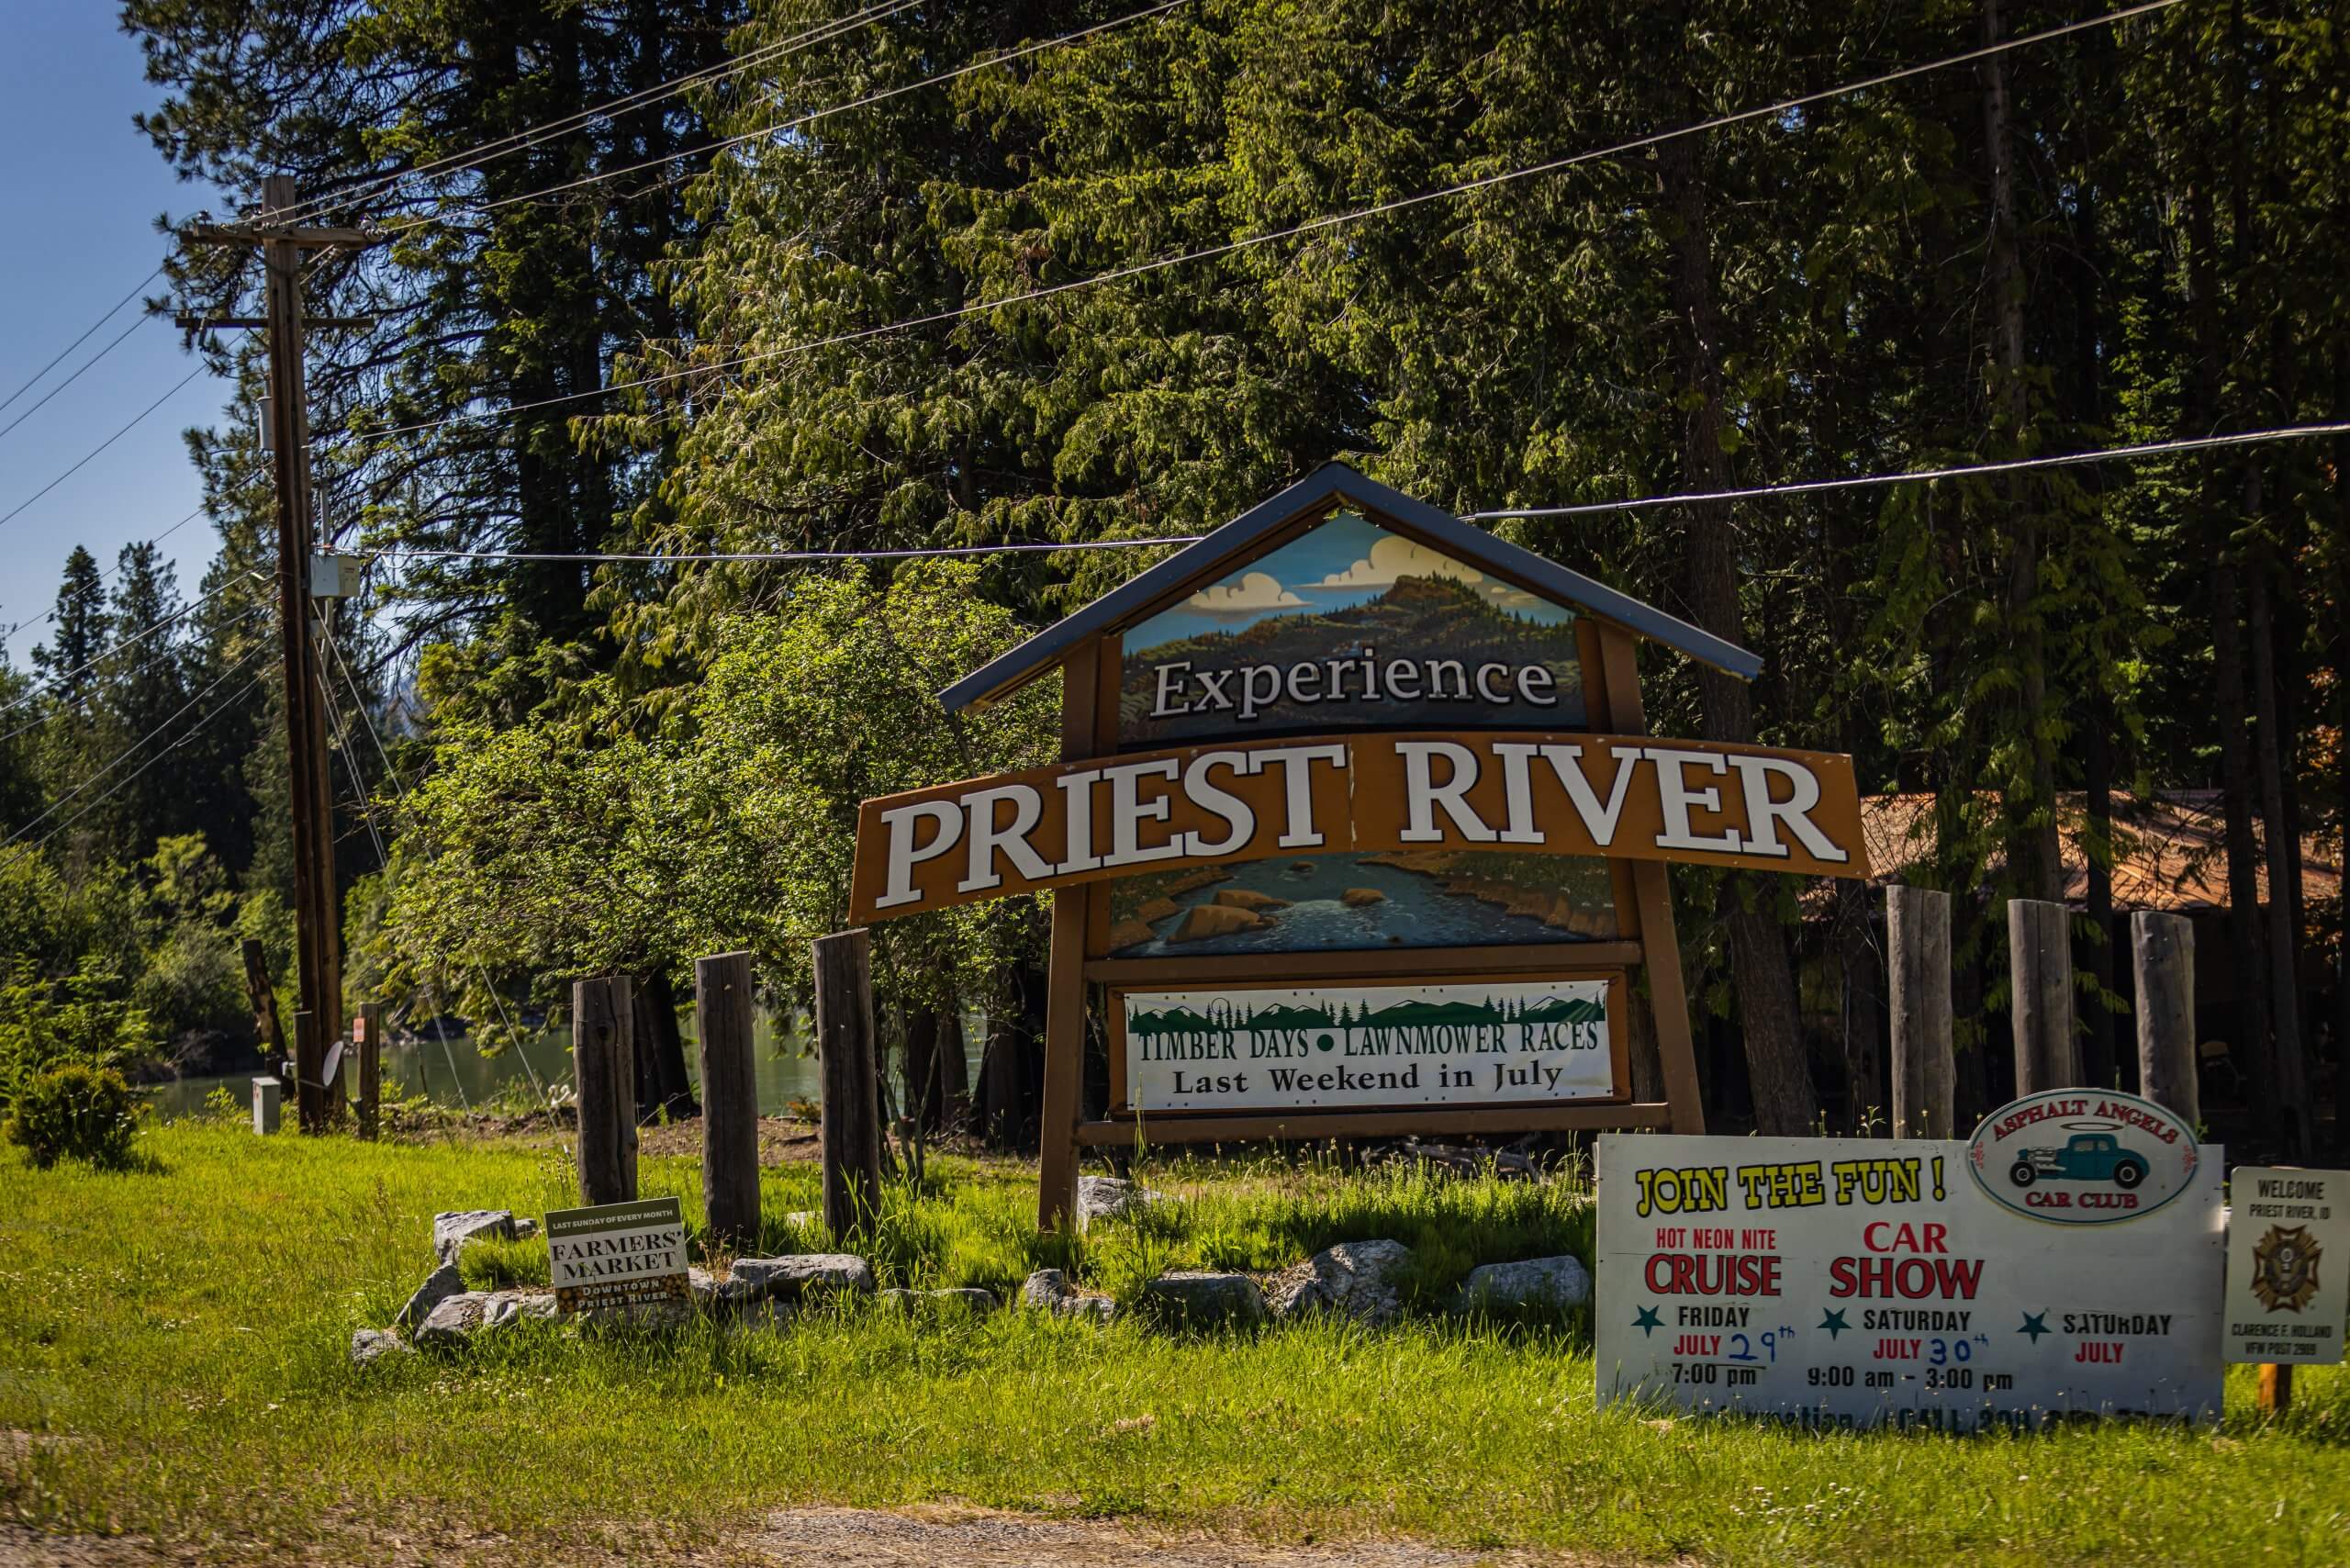 Welcome sign to the town of Priest River.